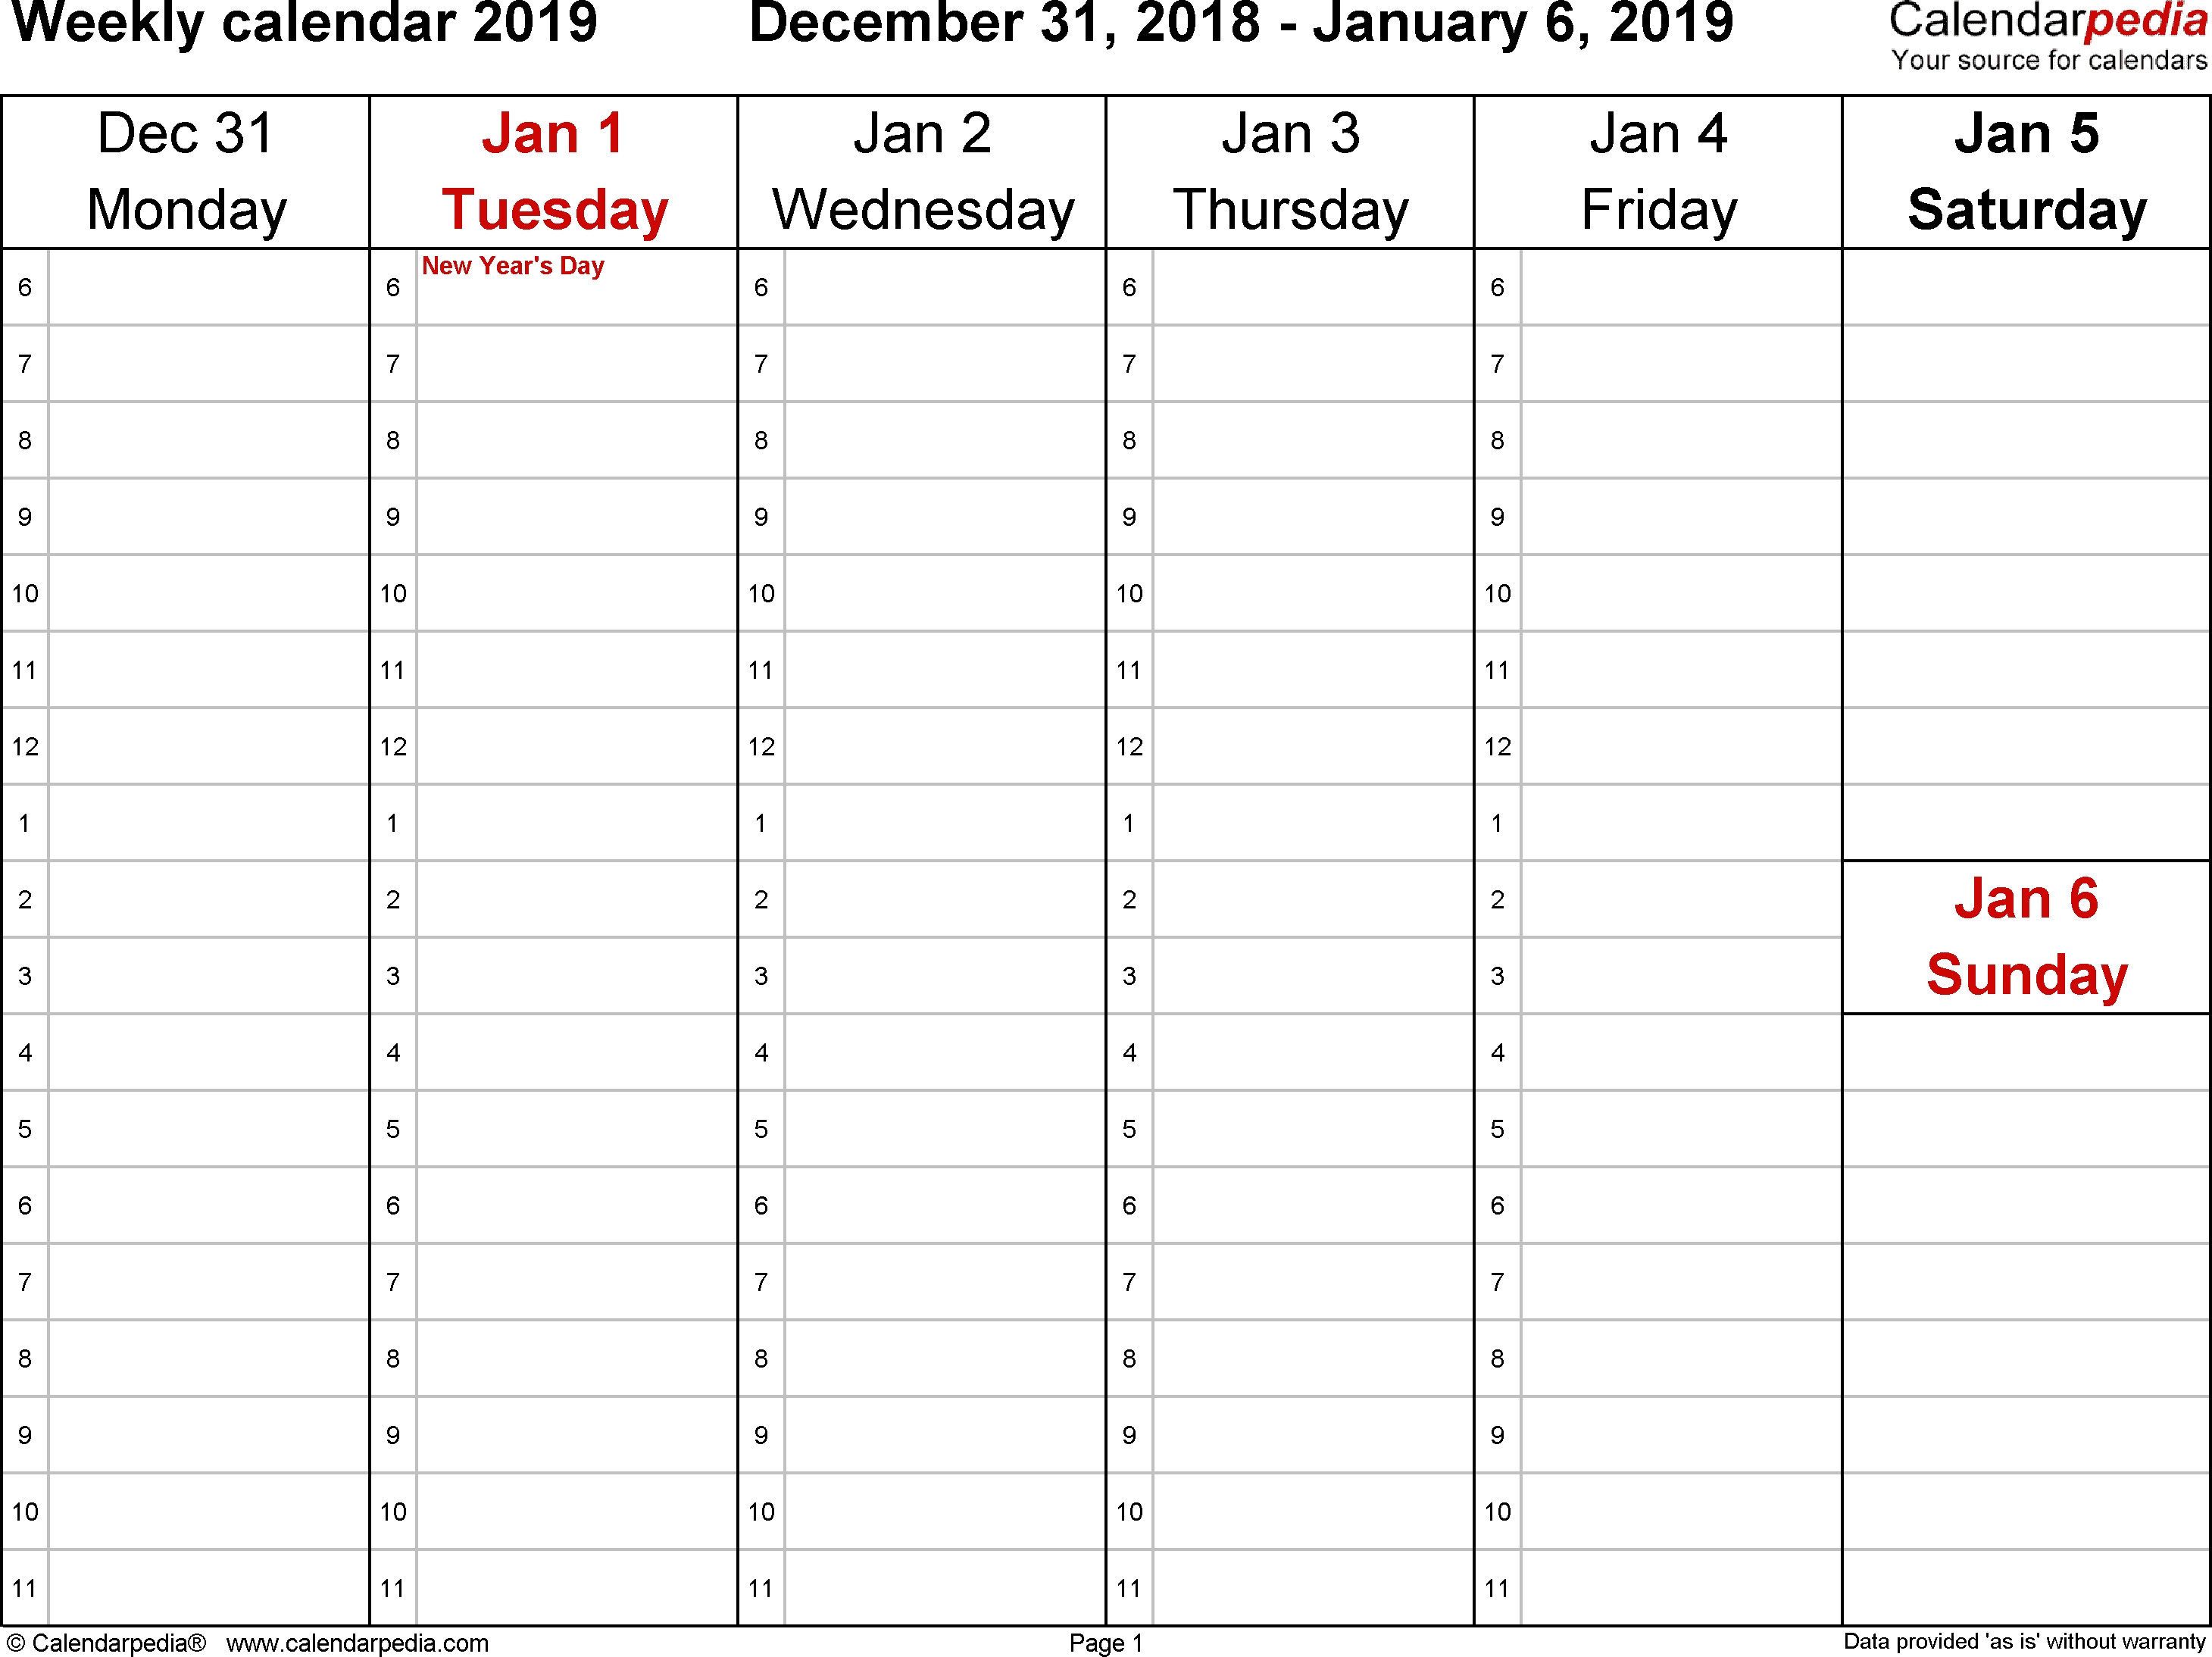 Schedule Template Excel Weekly Calendar With Time Slots Free Blank in Generic Weekly Calendar With Time Slots